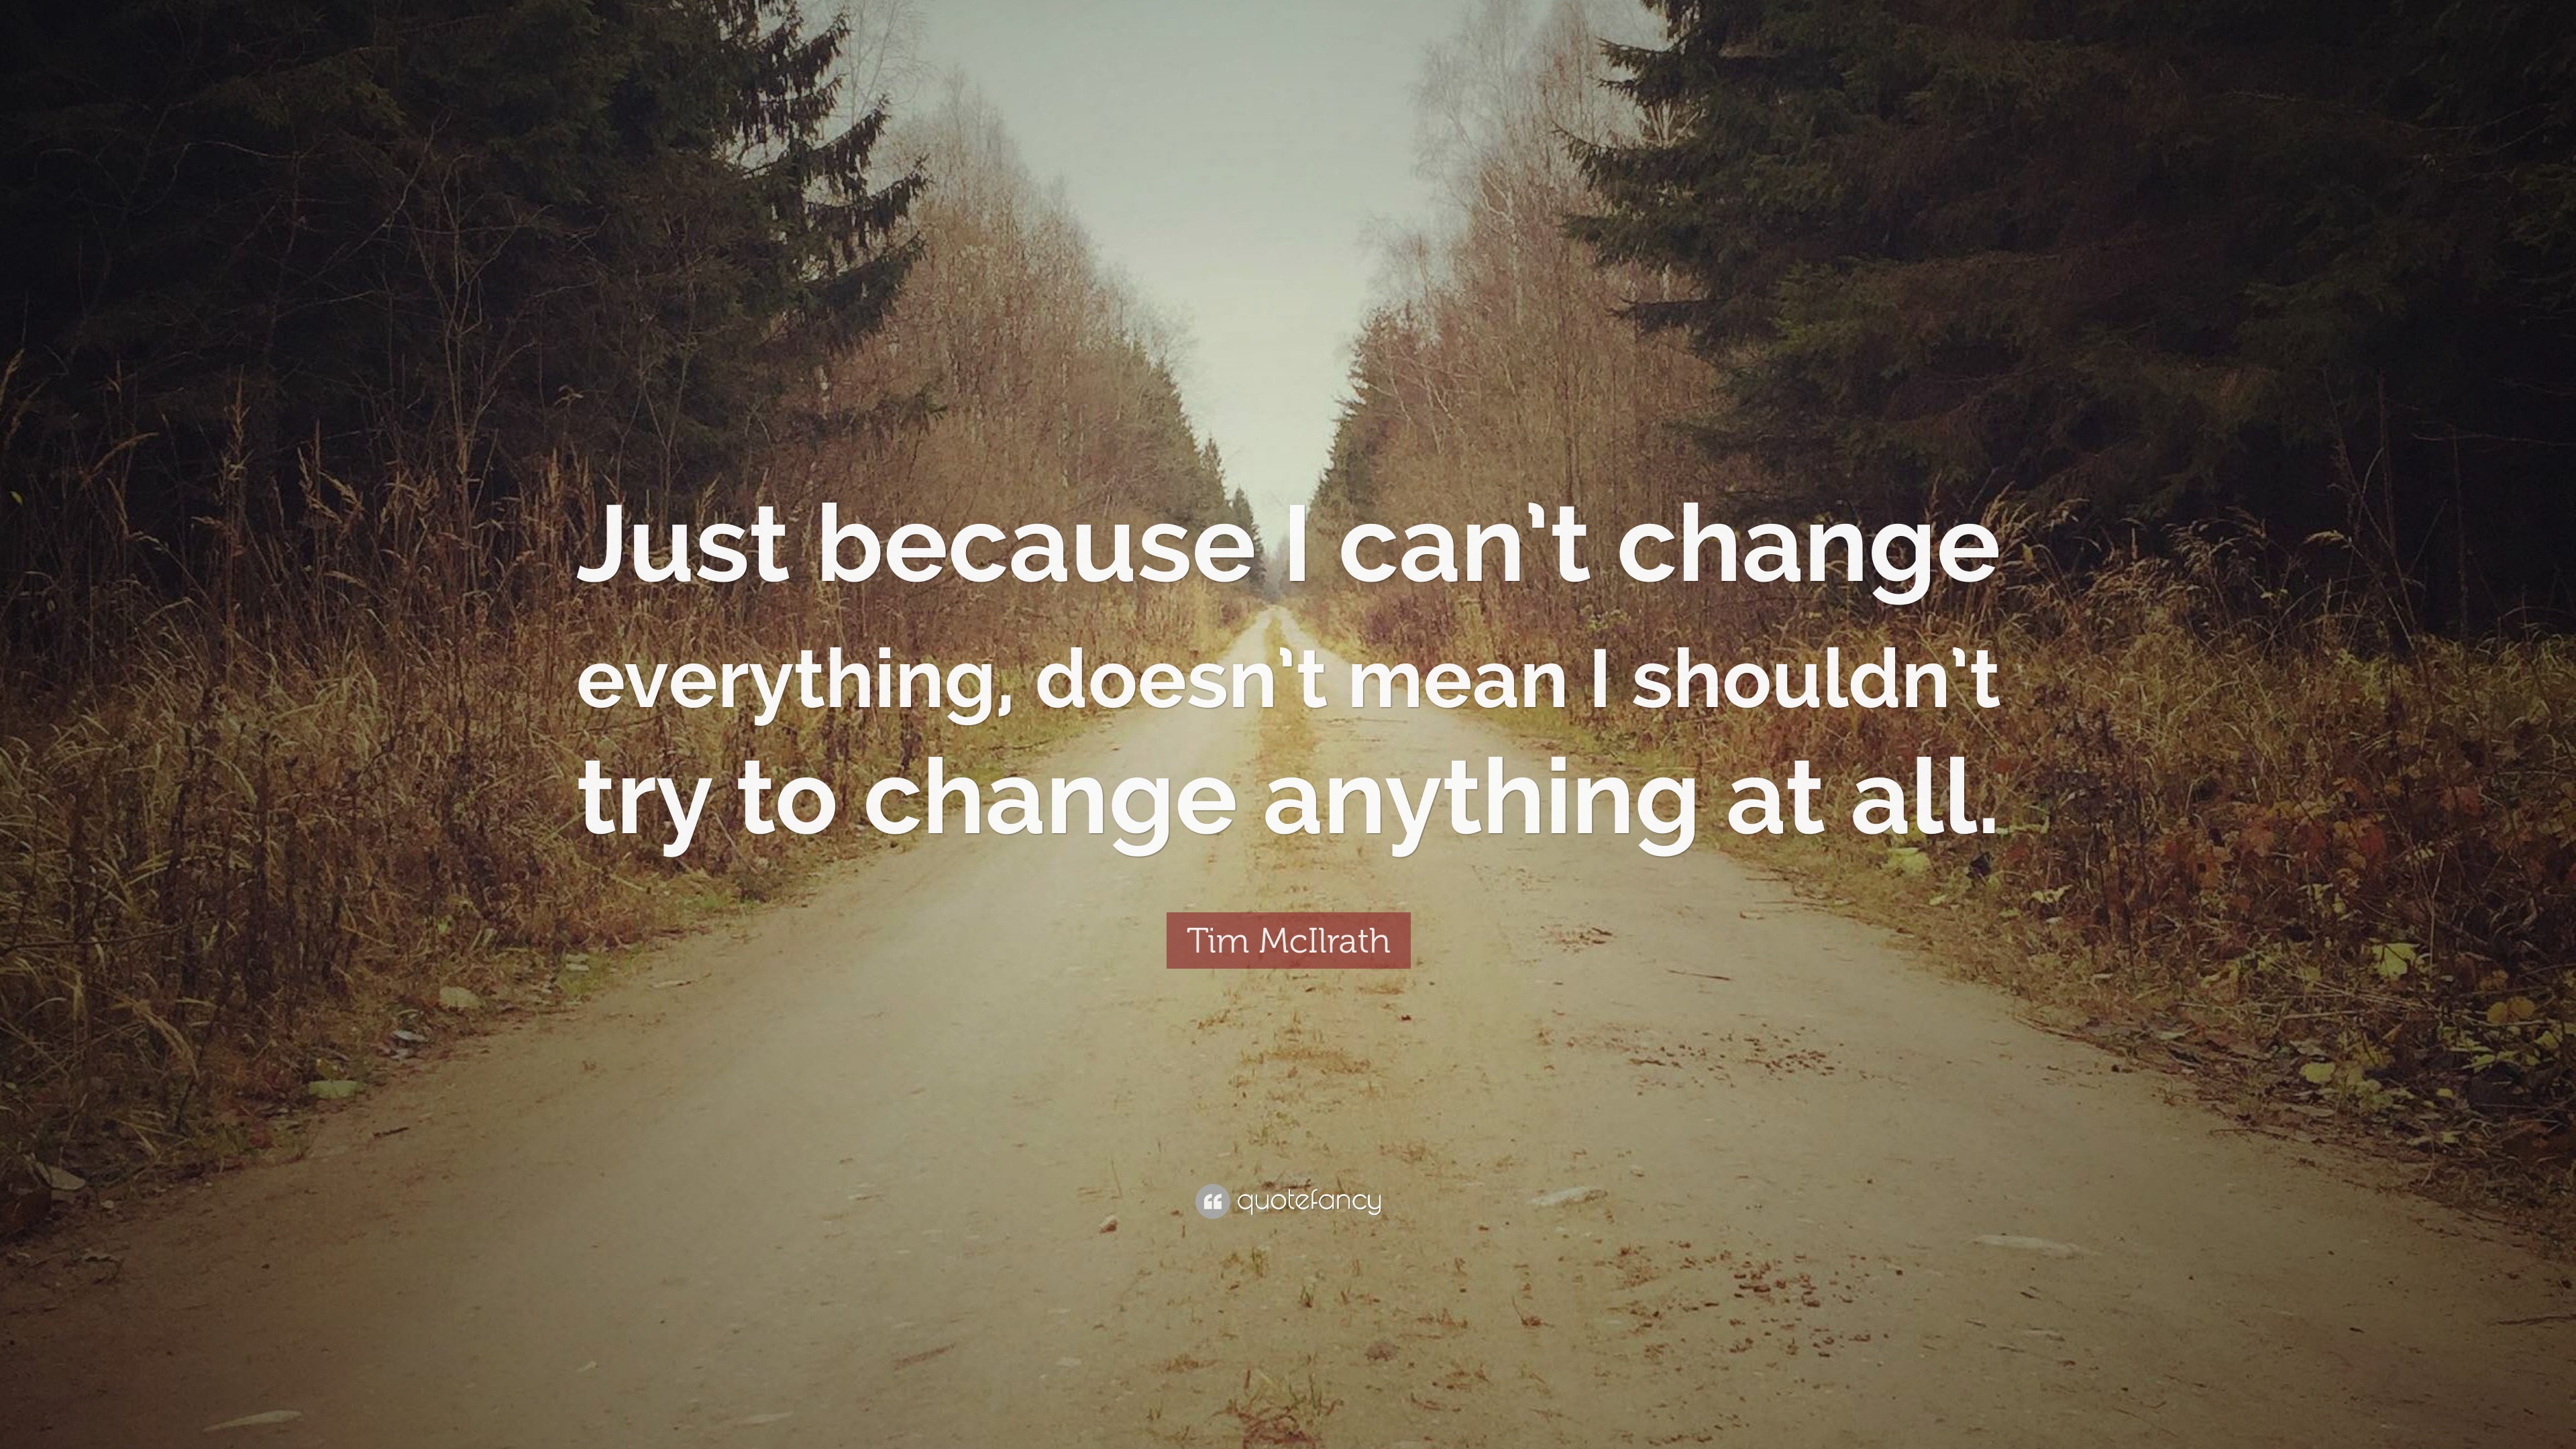 Tim McIlrath Quote: “Just because I can’t change everything, doesn’t ...